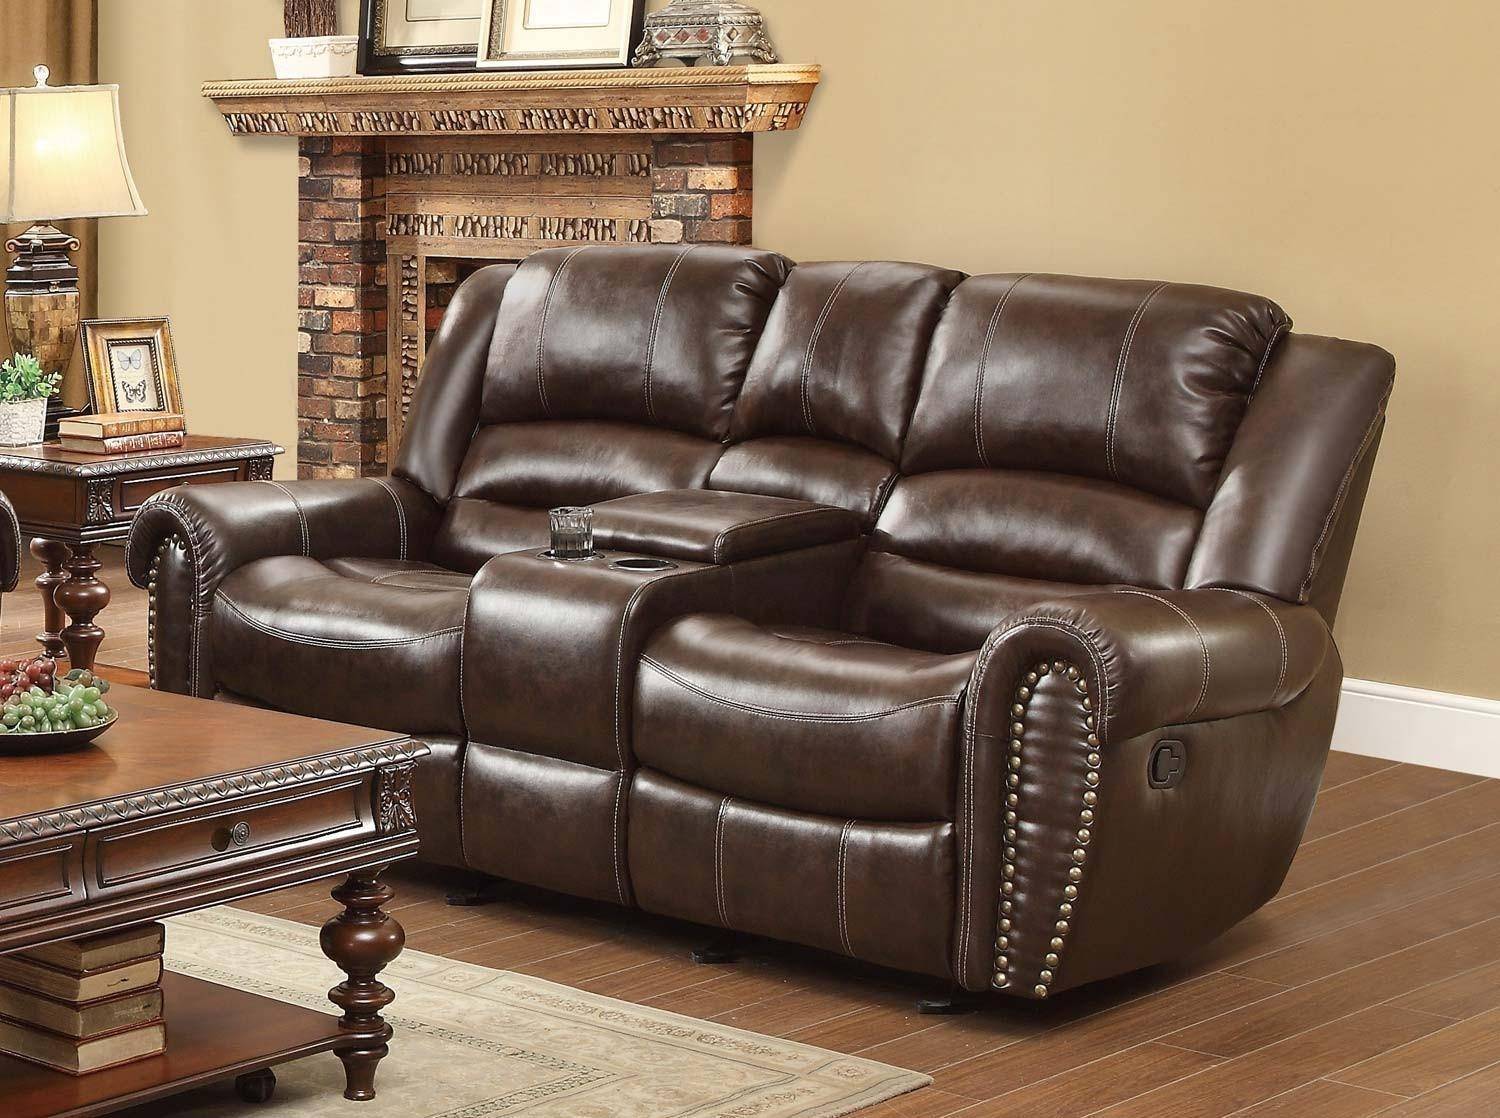 Center Hill Reclining Loveseat, Leather Dual Reclining Sofa